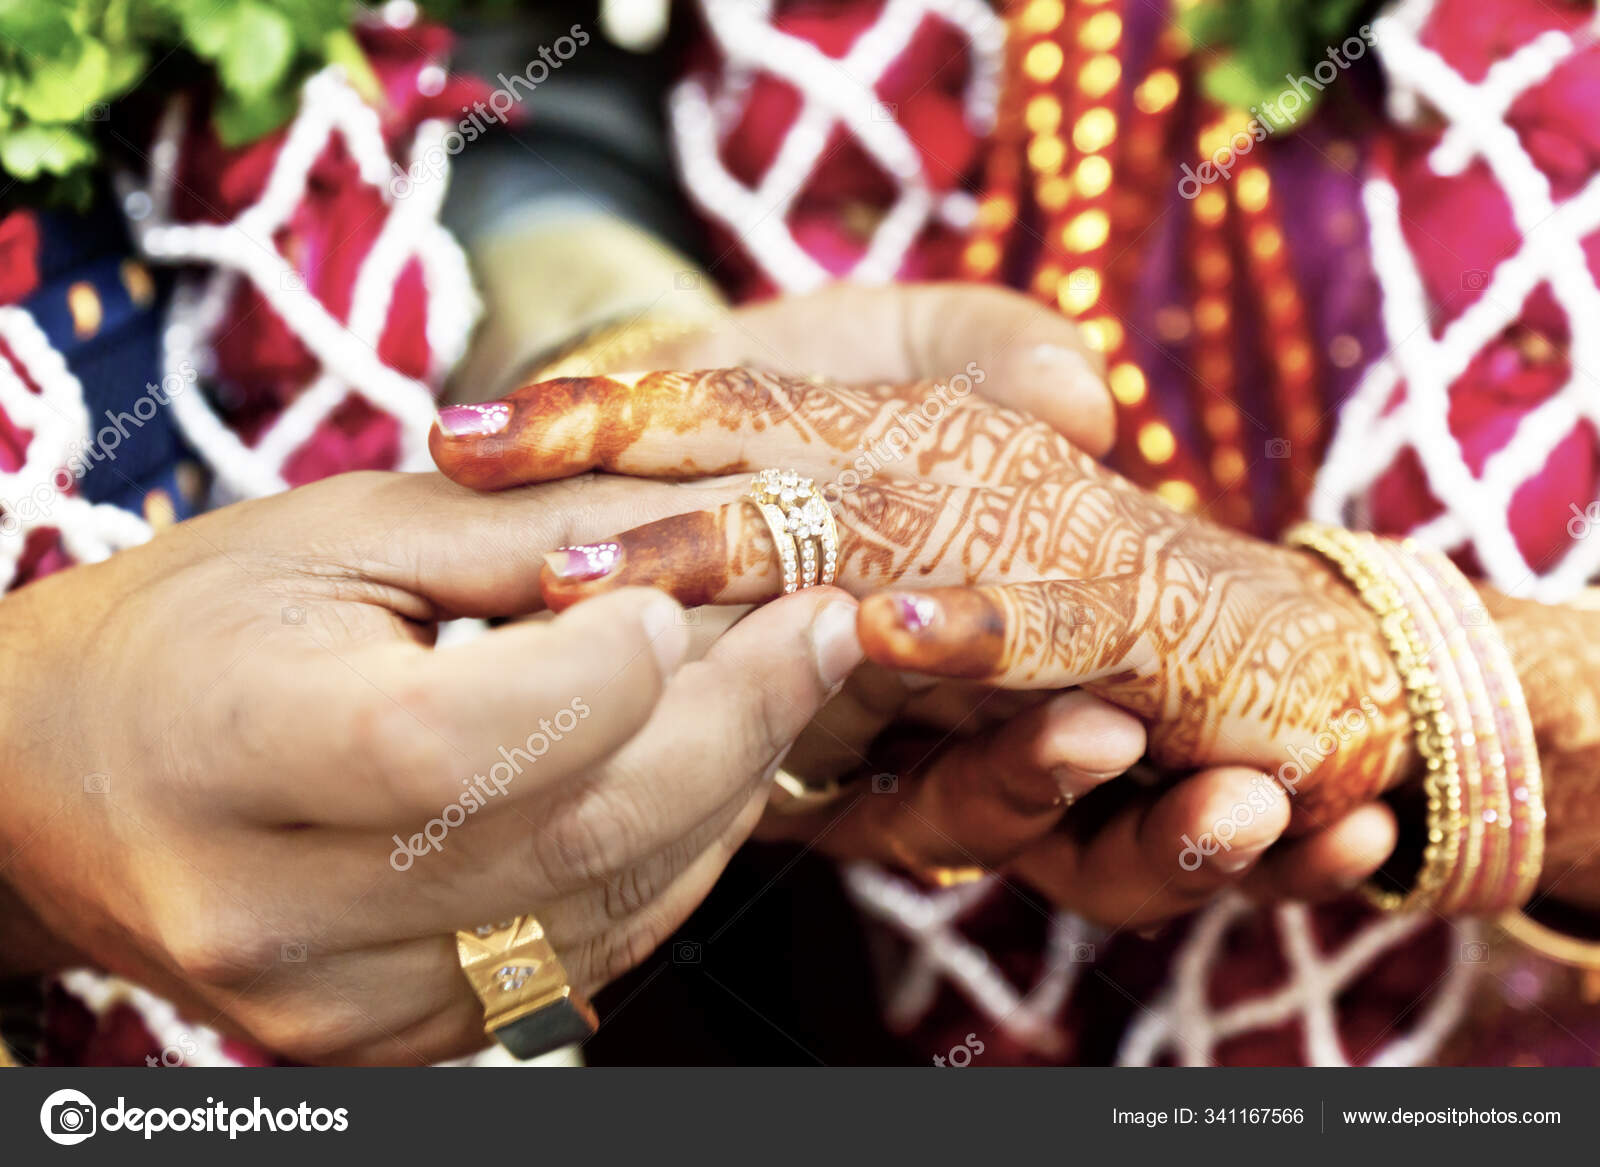 The delightful details of a Hindu wedding